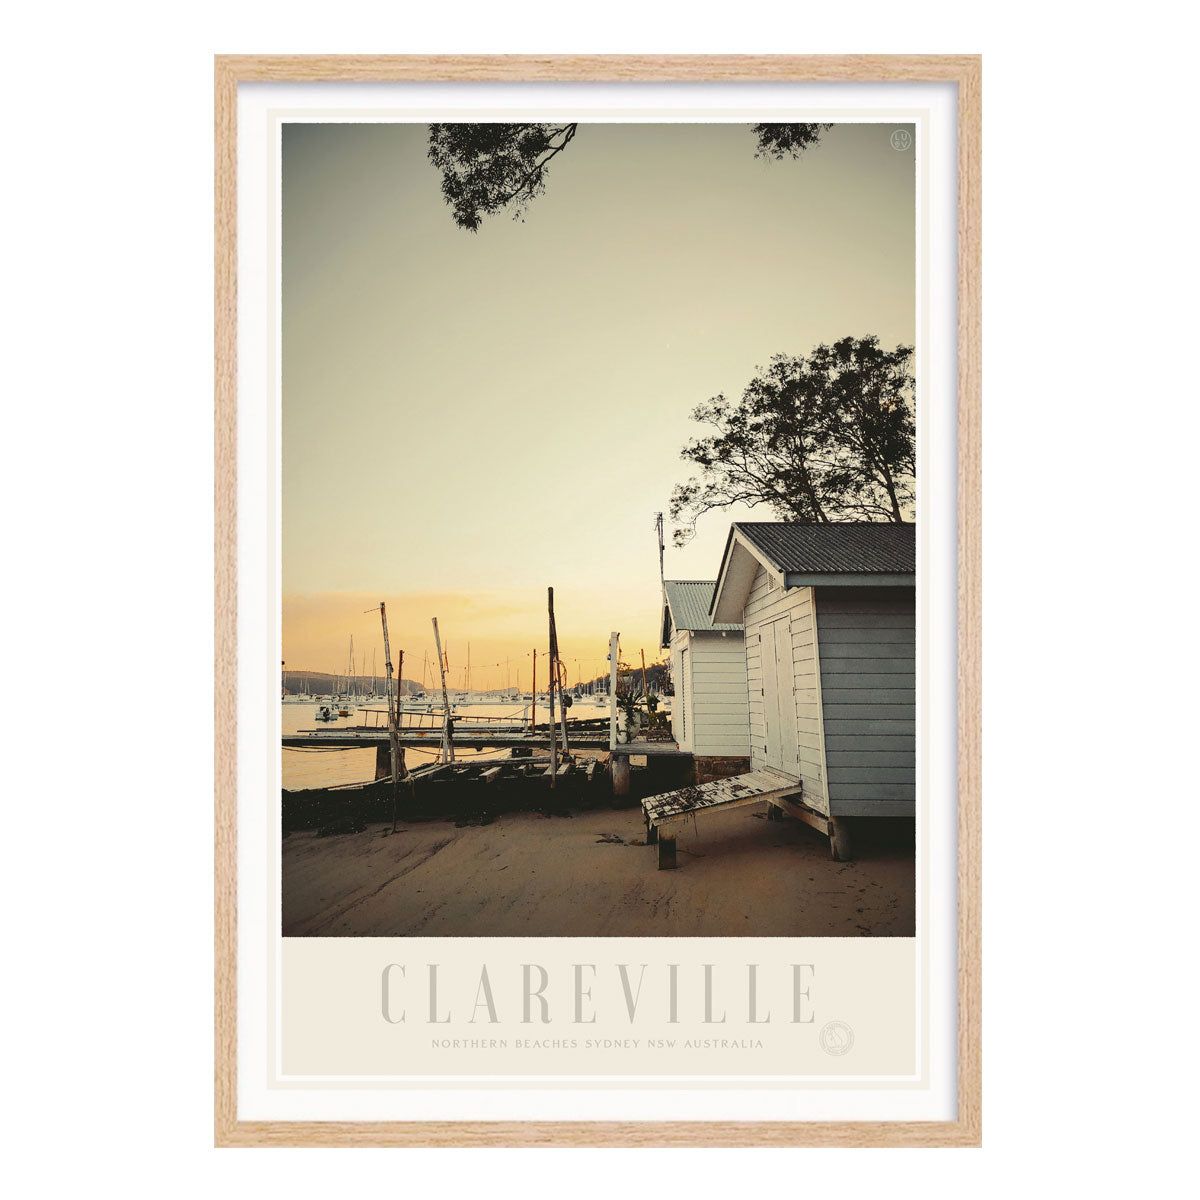 Clareville Pittwater Sydney, vintage retro poster print in oak frame from Places We Luv